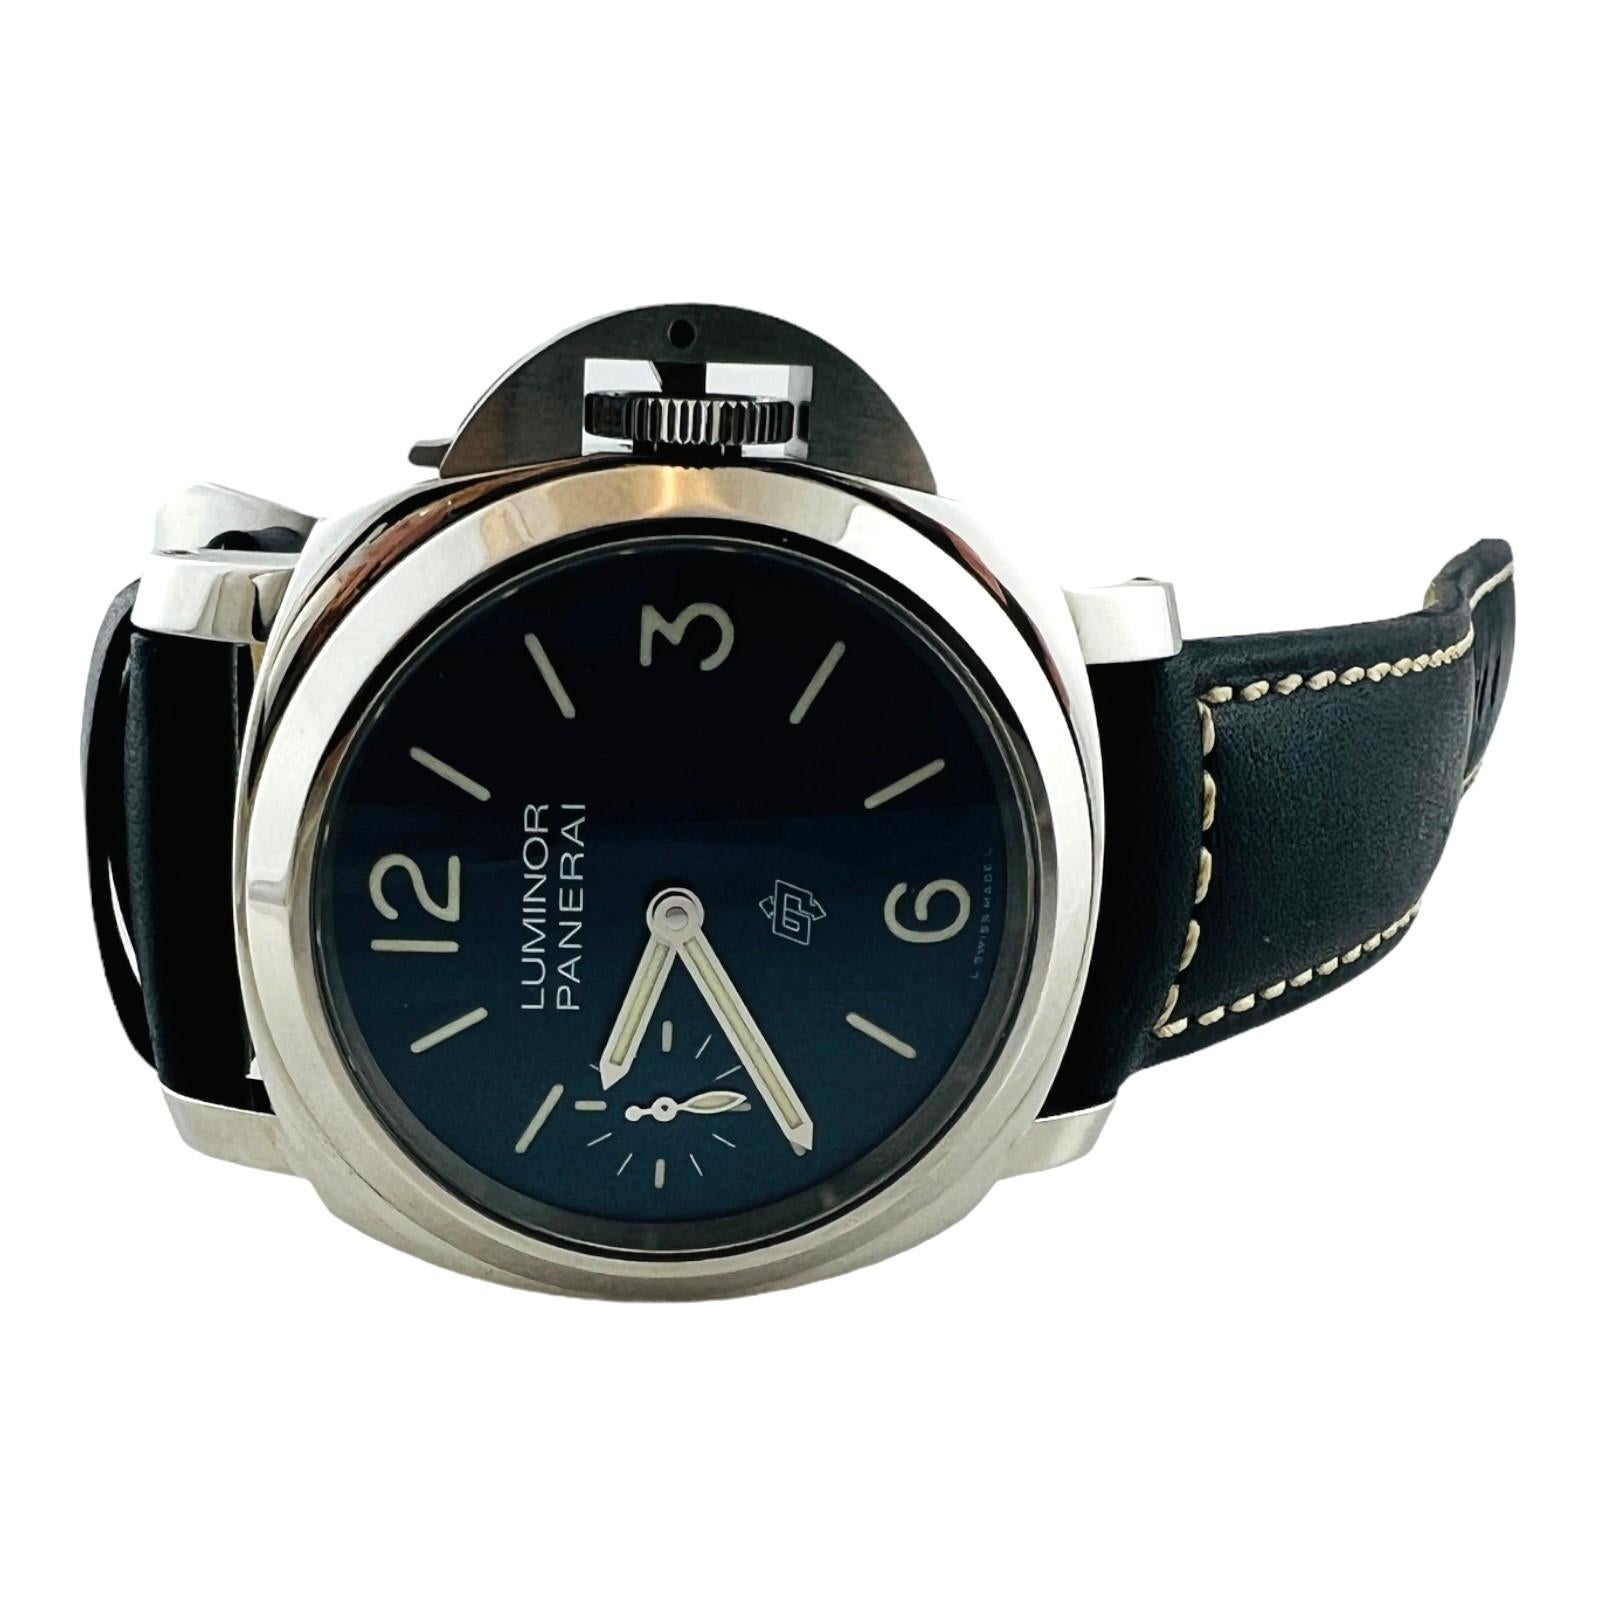 Panerai Luminor Men's Watch

Model: PAM 01085
Serial: OP7233PLO122967
Movement: 028133

Purchased May 2022 - worn very little

44mm case - brushed stainless steel

blue luminescent dial  - Arabic - small second hand at 9

blue leather band on watch